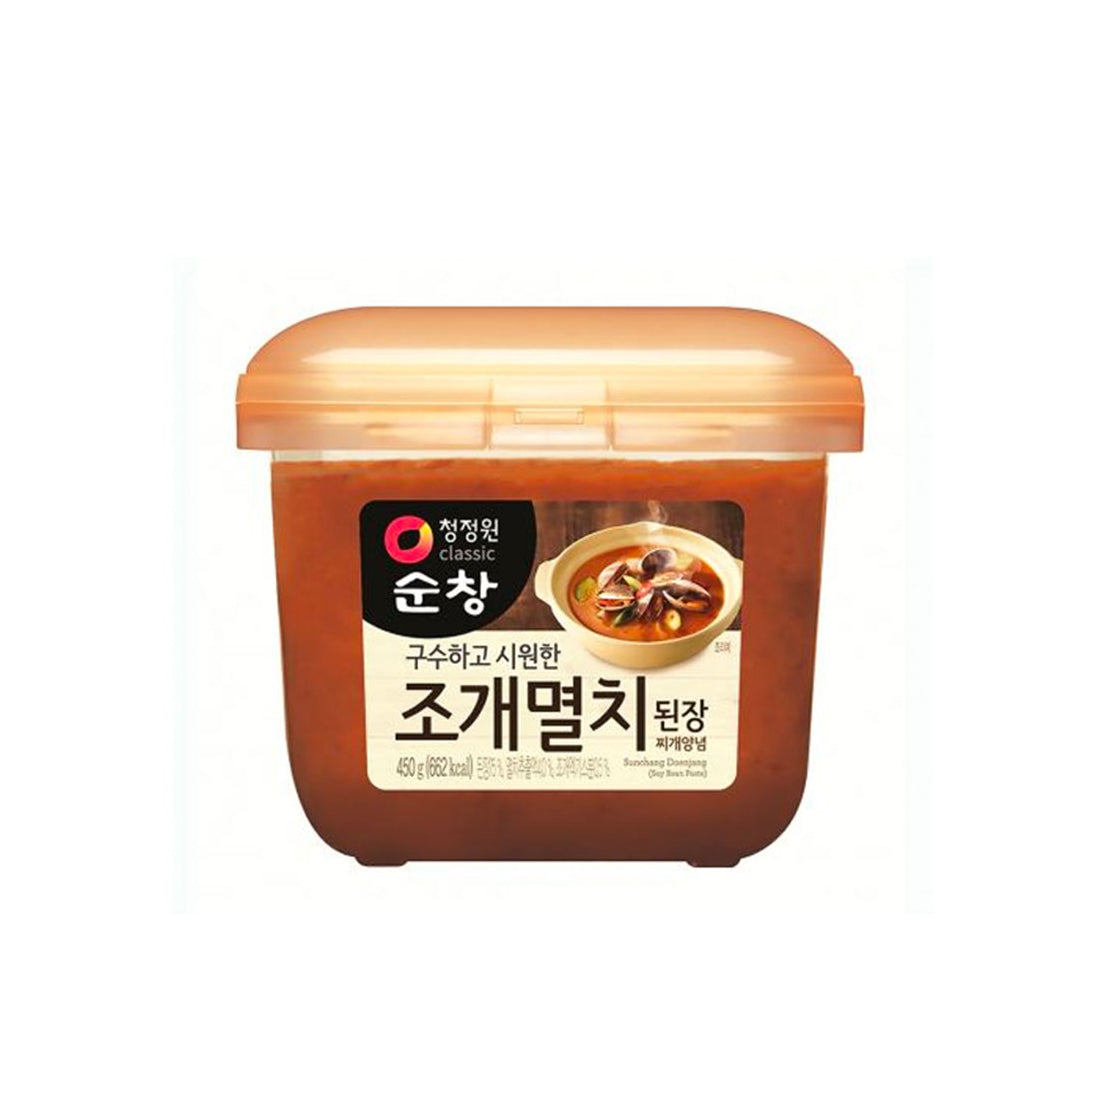 Soy Bean Paste For Soup(Anchovy+Clam) 12/450g 순창 조개멸치 찌게된장